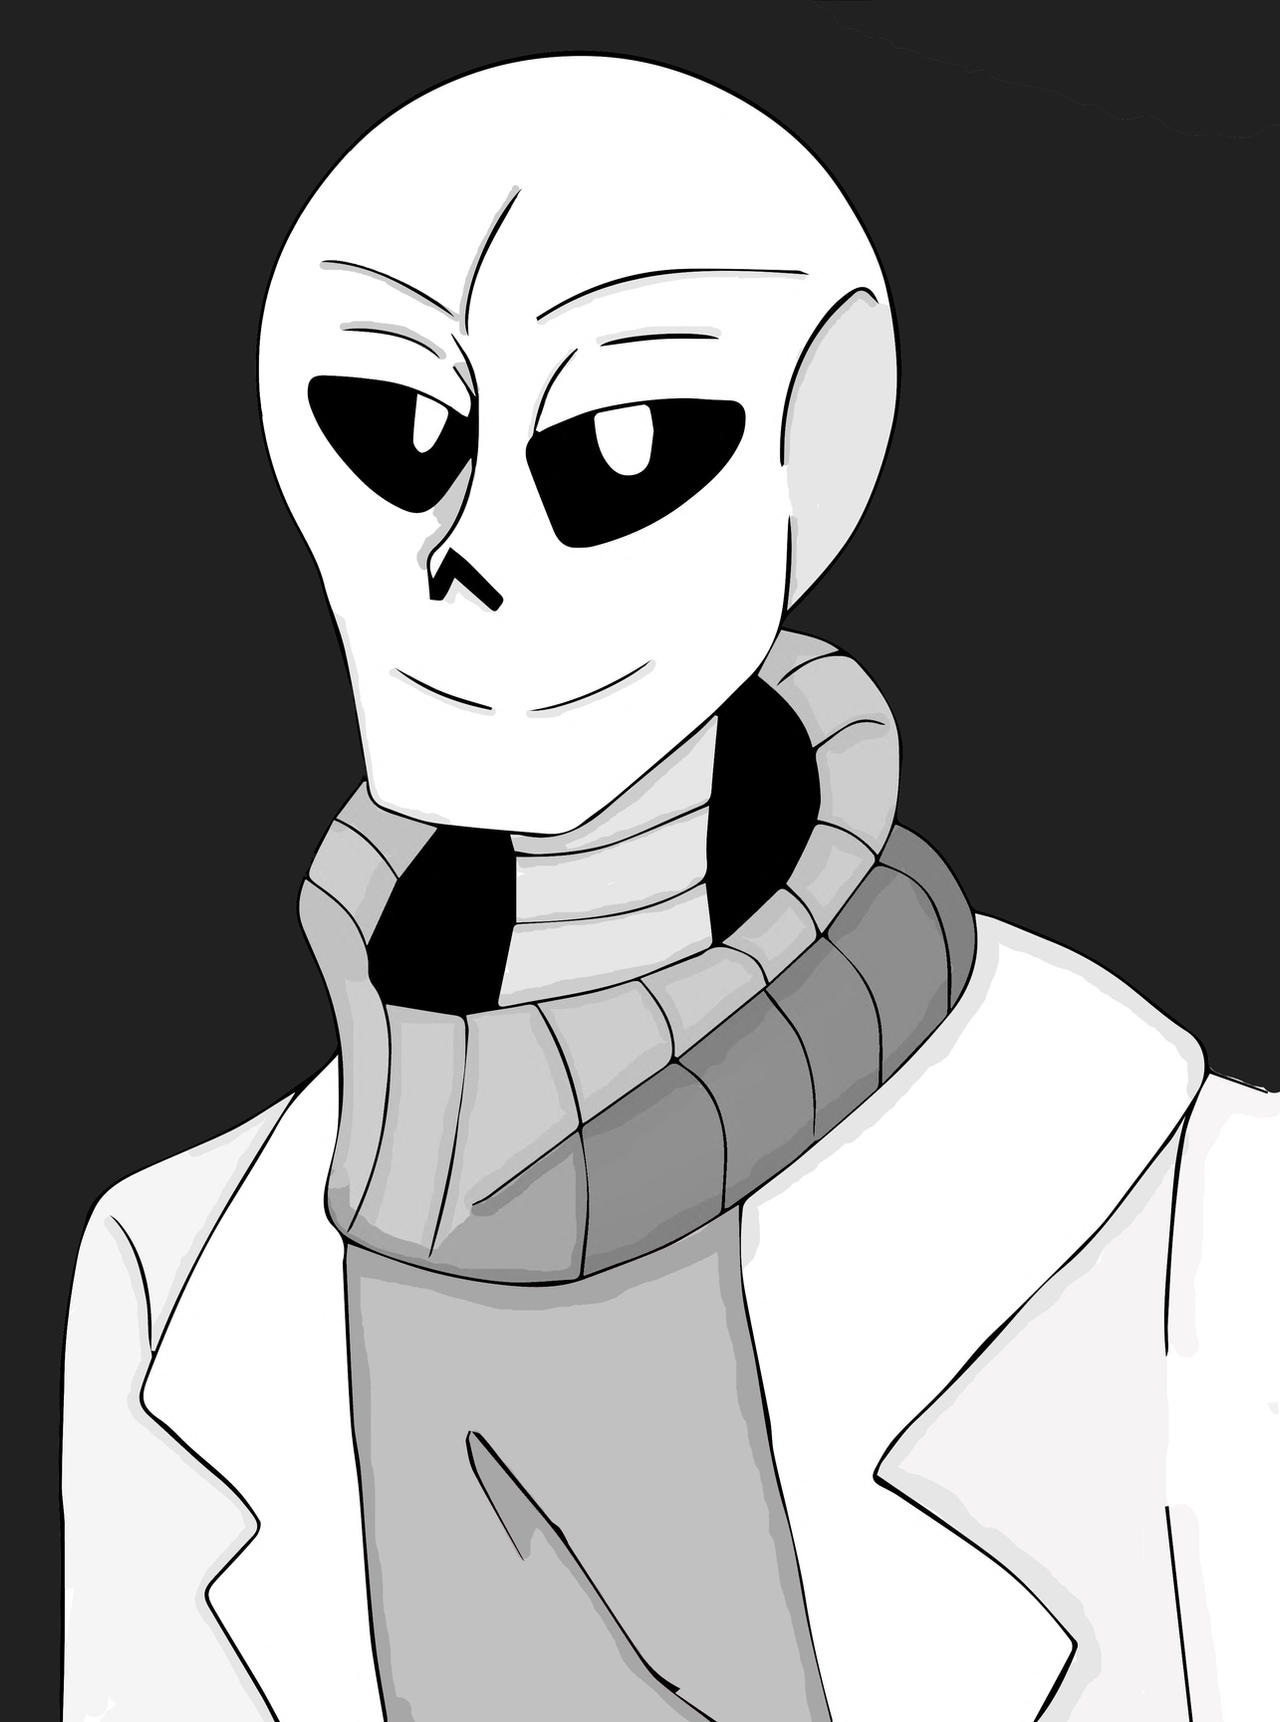 Doctor WD Gaster - Digital Painting by TaynahIbanez on DeviantArt